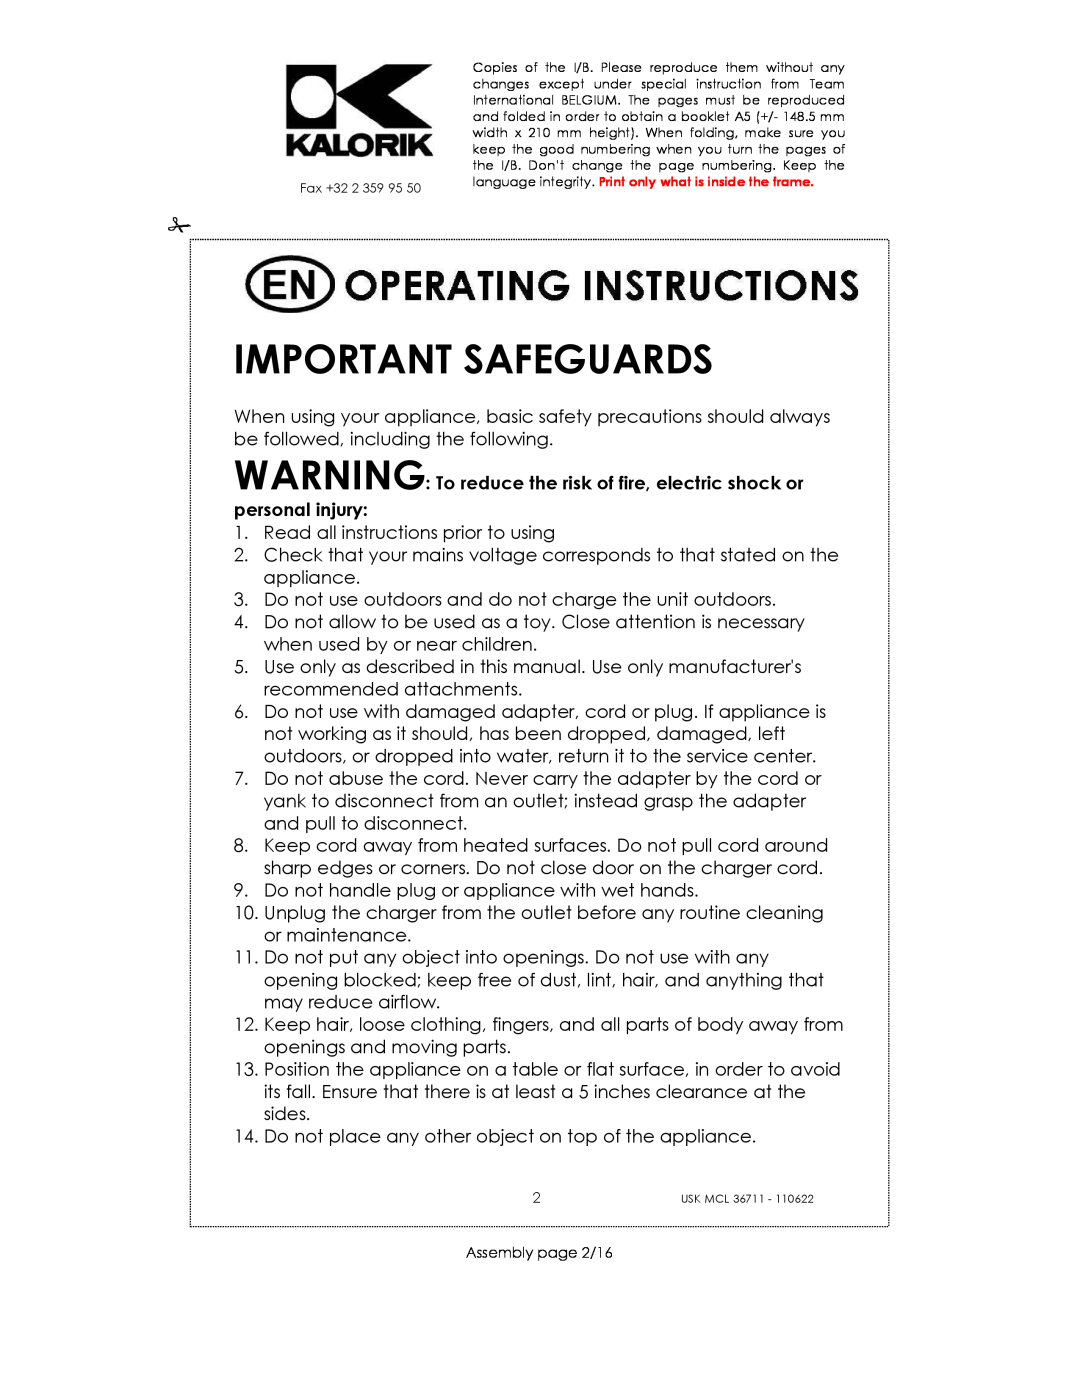 Kalorik USK MCL 36711 manual Important Safeguards, WARNING To reduce the risk of fire, electric shock or personal injury 